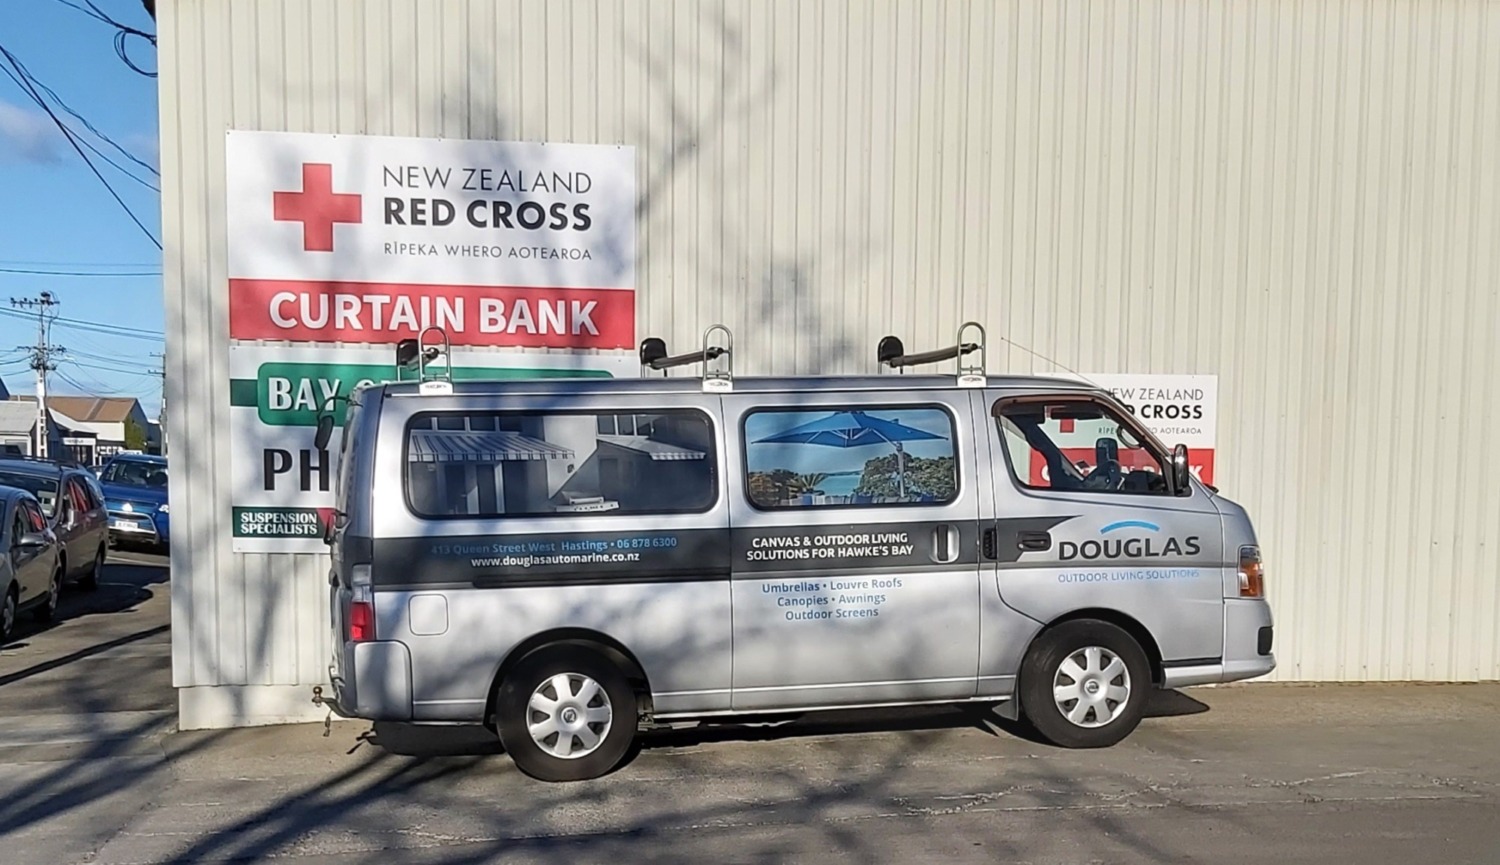 Douglas Innovation donates second hand industrial sewing machines for Red Cross Curtain Bank